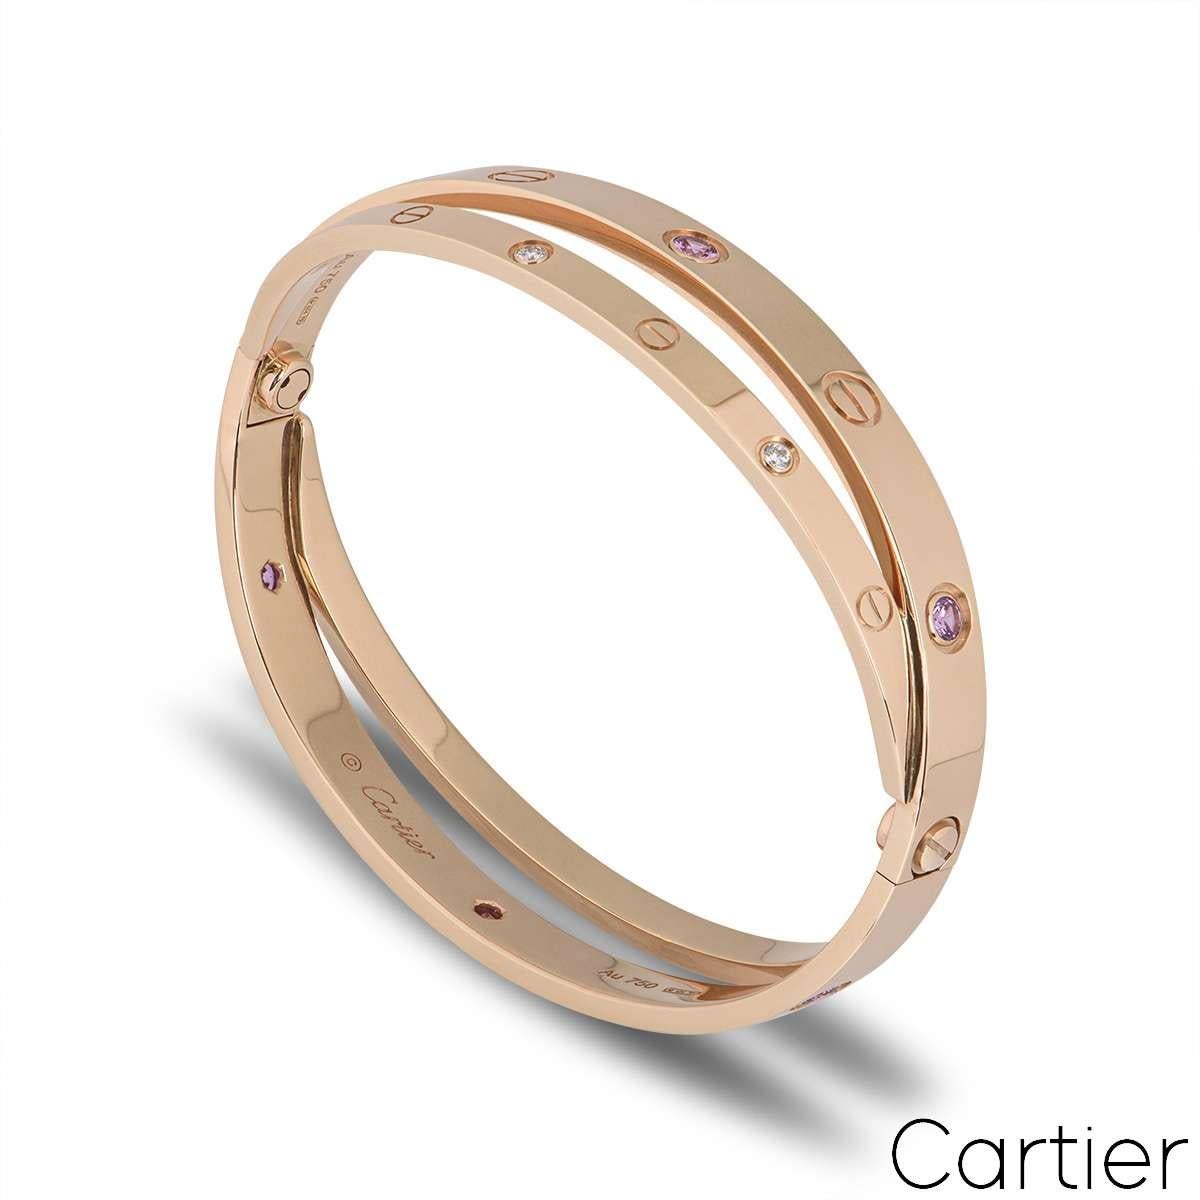 An 18k rose gold half diamond and pink sapphire double Cartier bracelet, from the iconic Love collection. Featuring the Cartier screw motif alternating with 6 round brilliant cut diamonds and 6 pink sapphires displayed around the outside. This